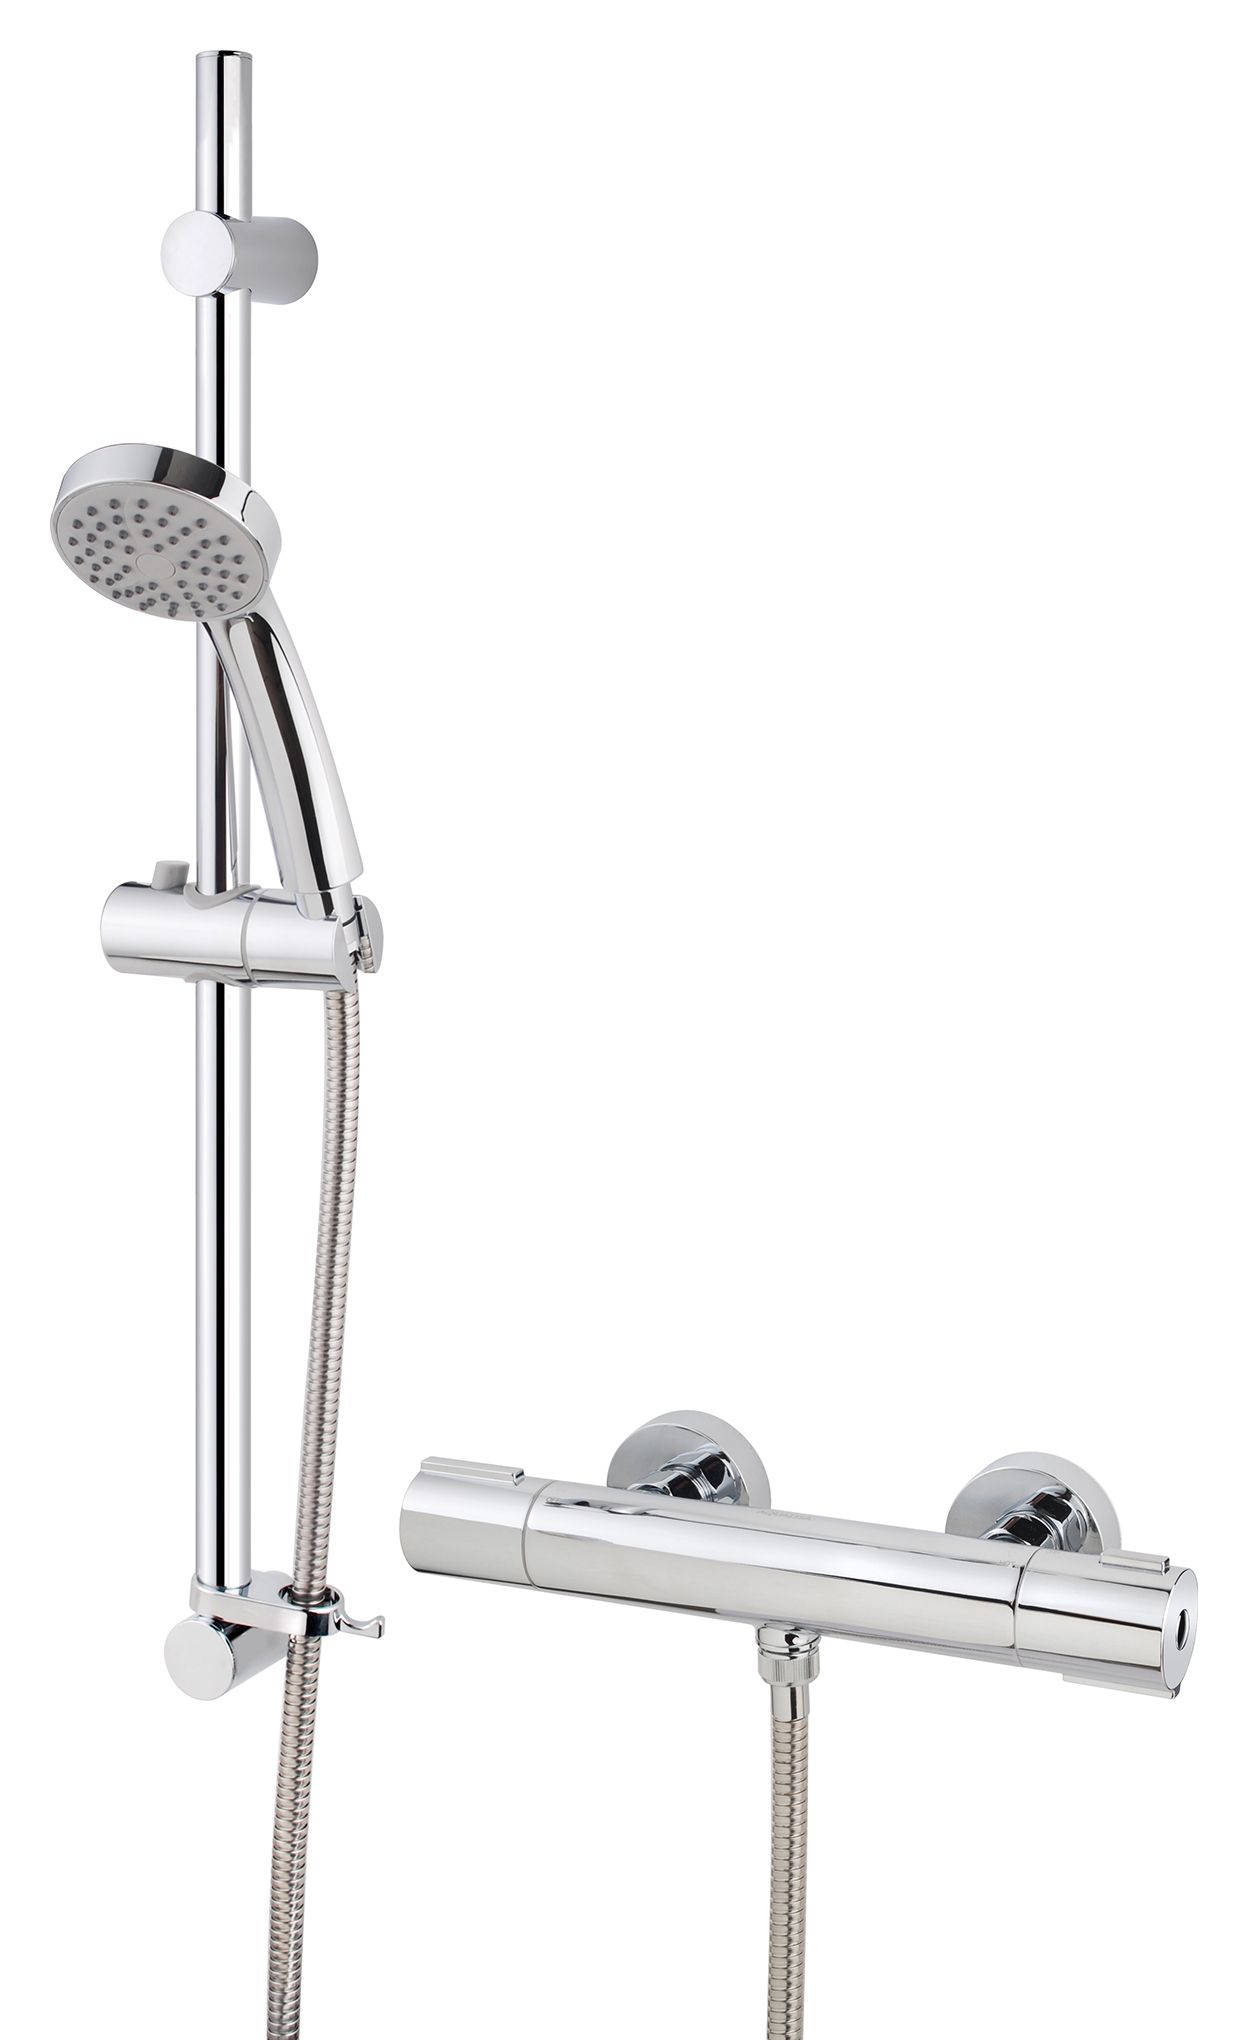 Image of Alban Thermostatic Mixer Shower - Chrome